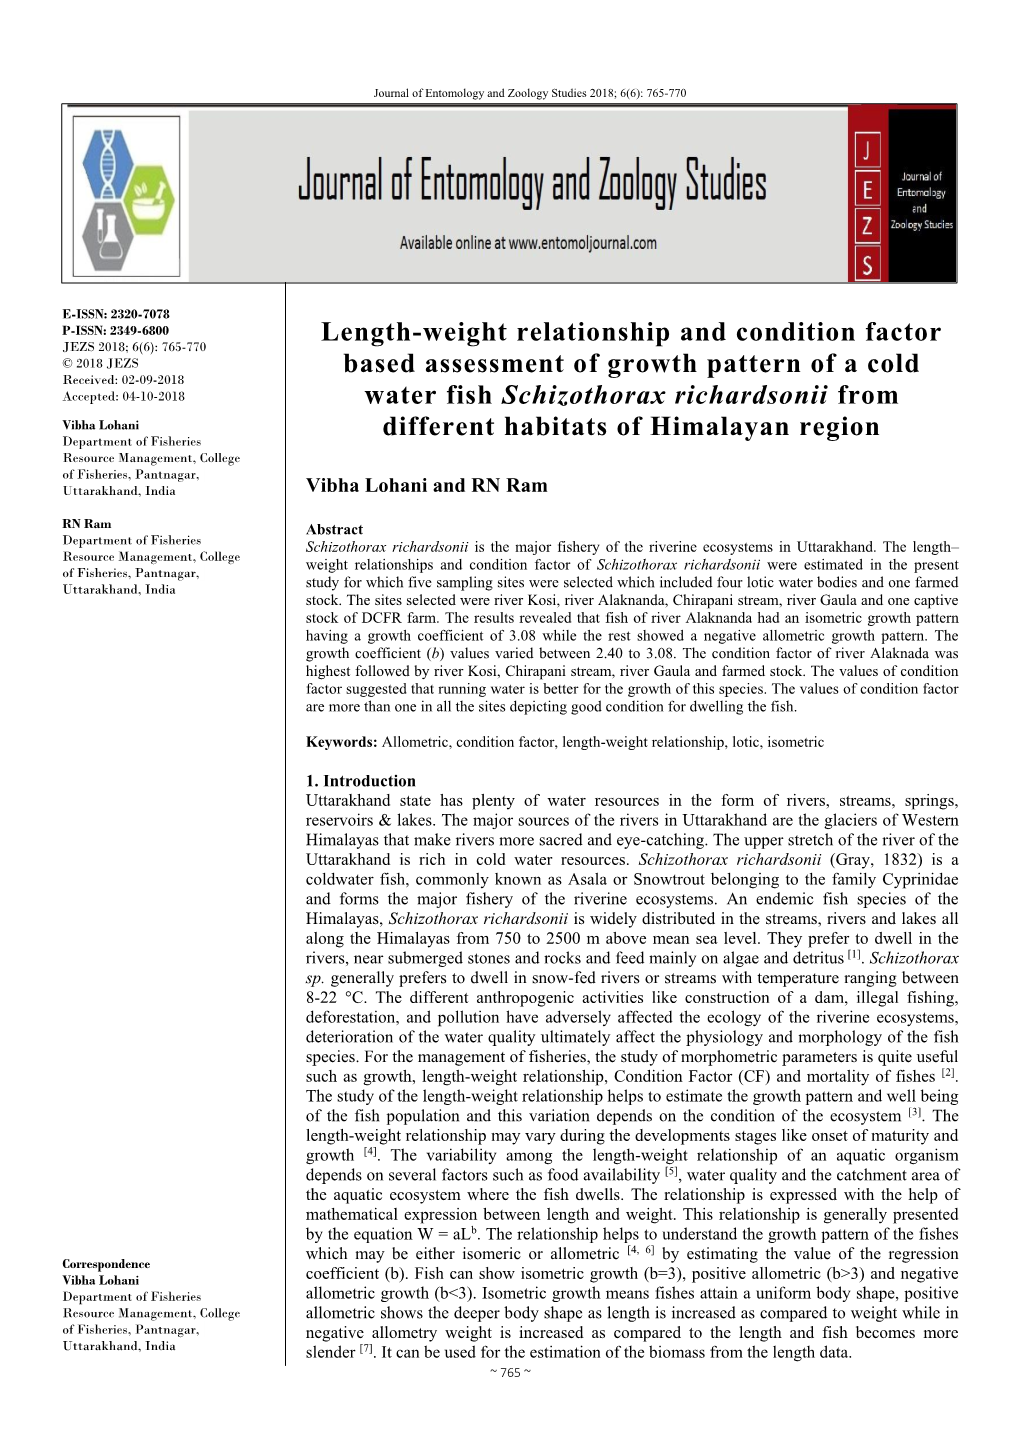 Length-Weight Relationship and Condition Factor Based Assessment